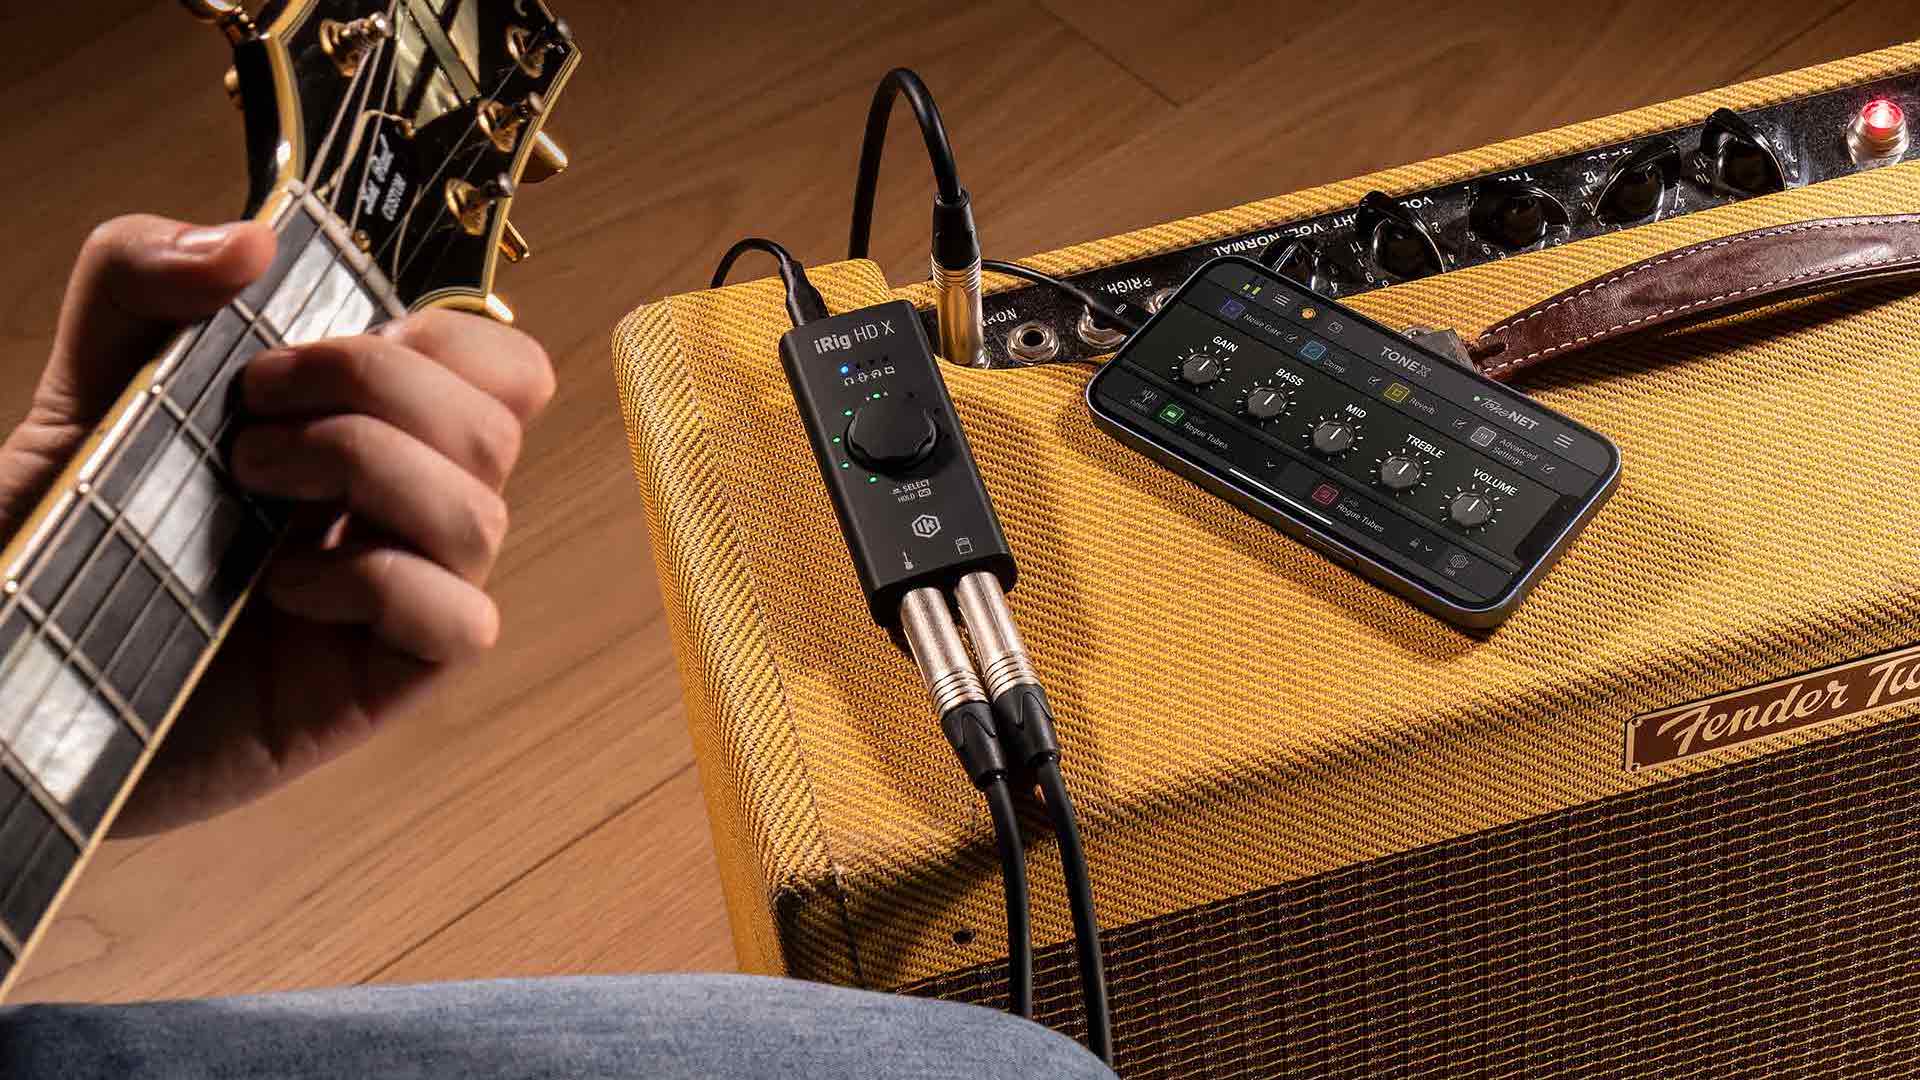 IK Multimedia iRig USB Guitar Interface for iPhone, iPad, Android, Mac, and  PC